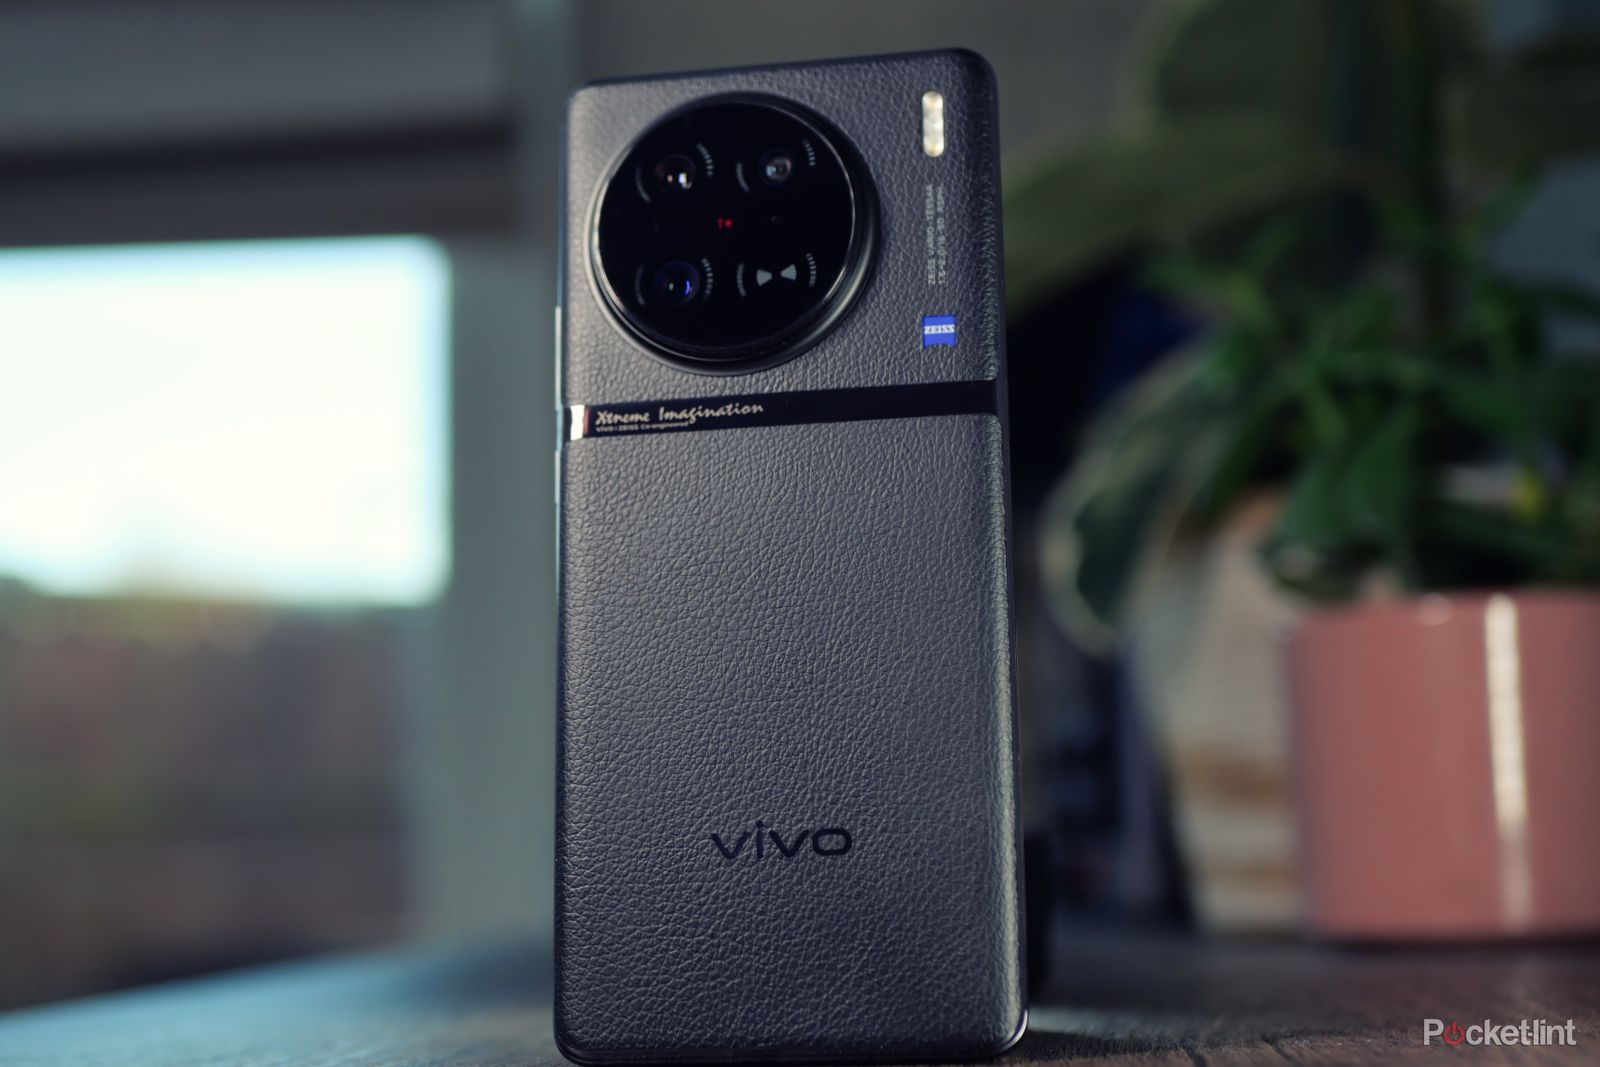 vivo brings the X90 Pro photography flagship to Europe